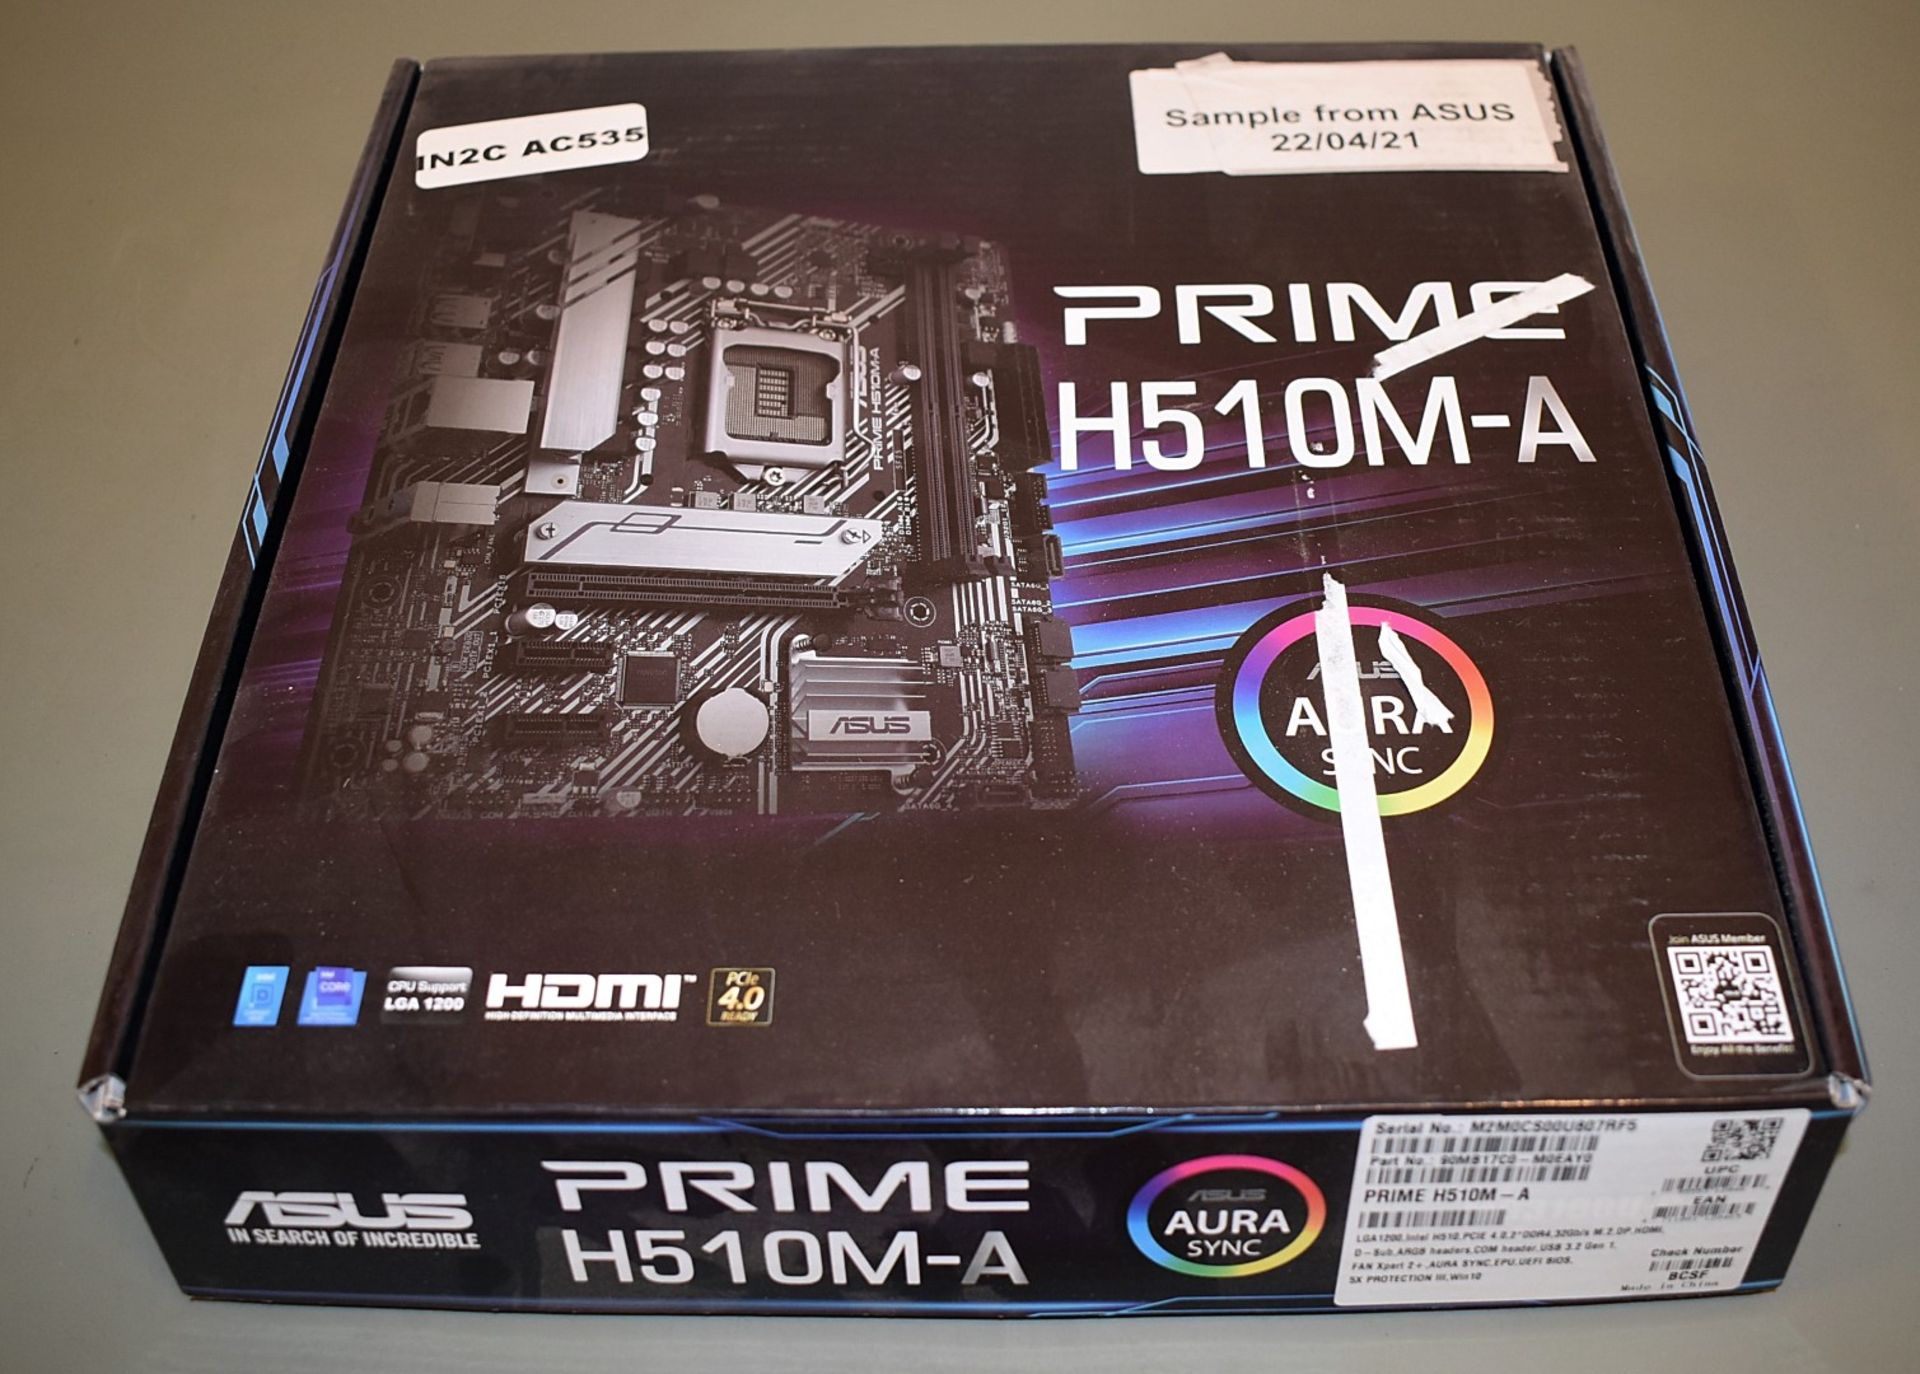 1 x Asus Prime H510M-A Motherboard For LGA1200 Intel Processors - Boxed With Accessories - Sample - Image 6 of 6